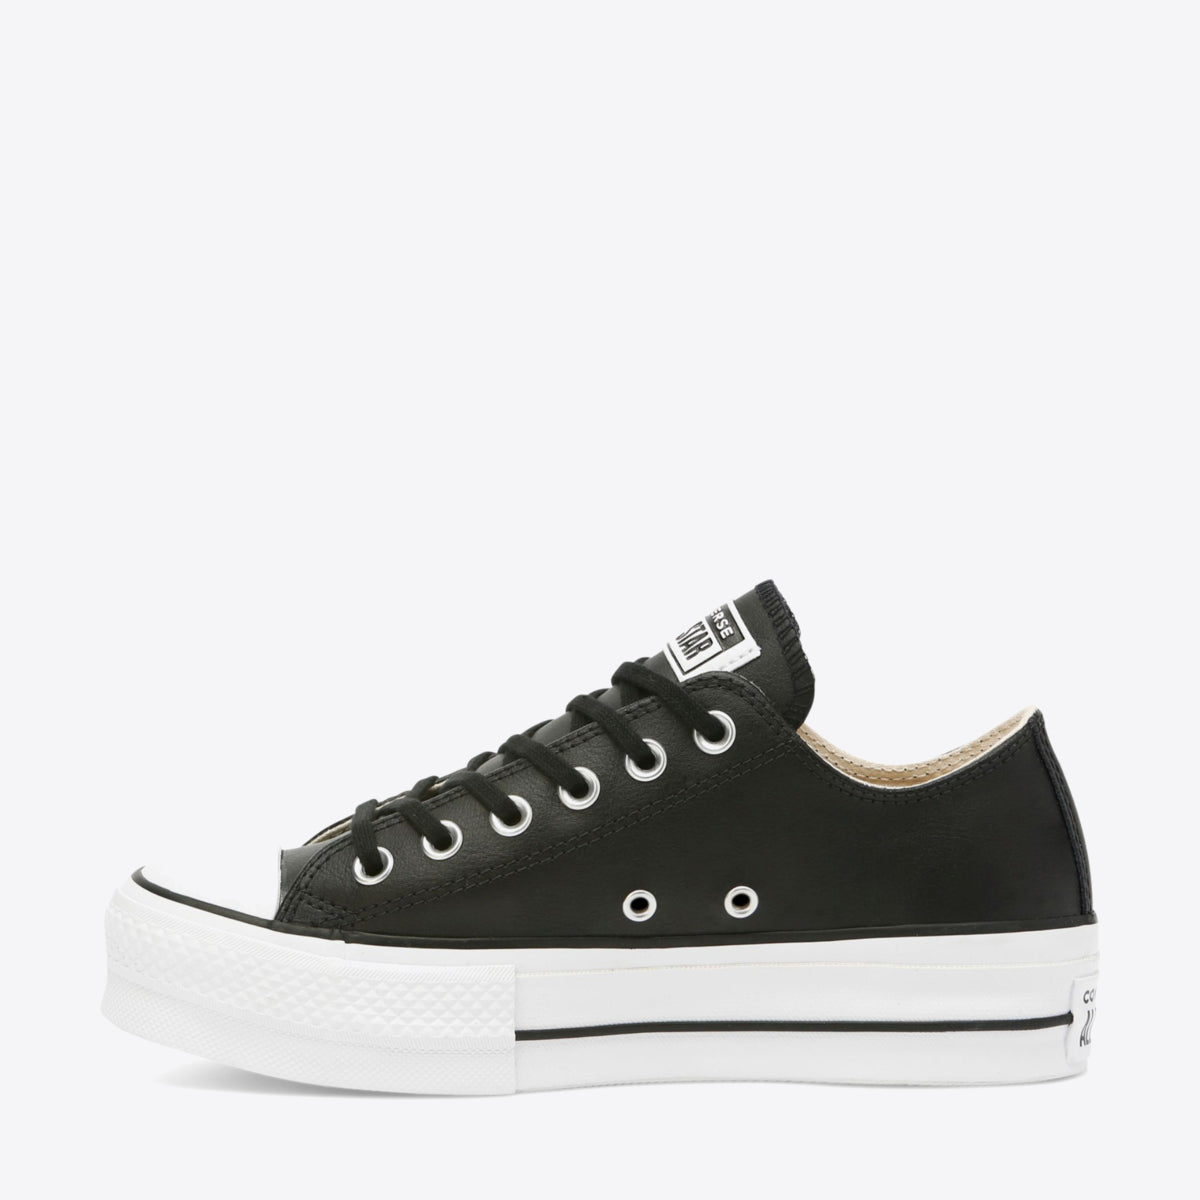 CONVERSE Chuck Taylor All Star Leather Lift Low Black/White - Image 5